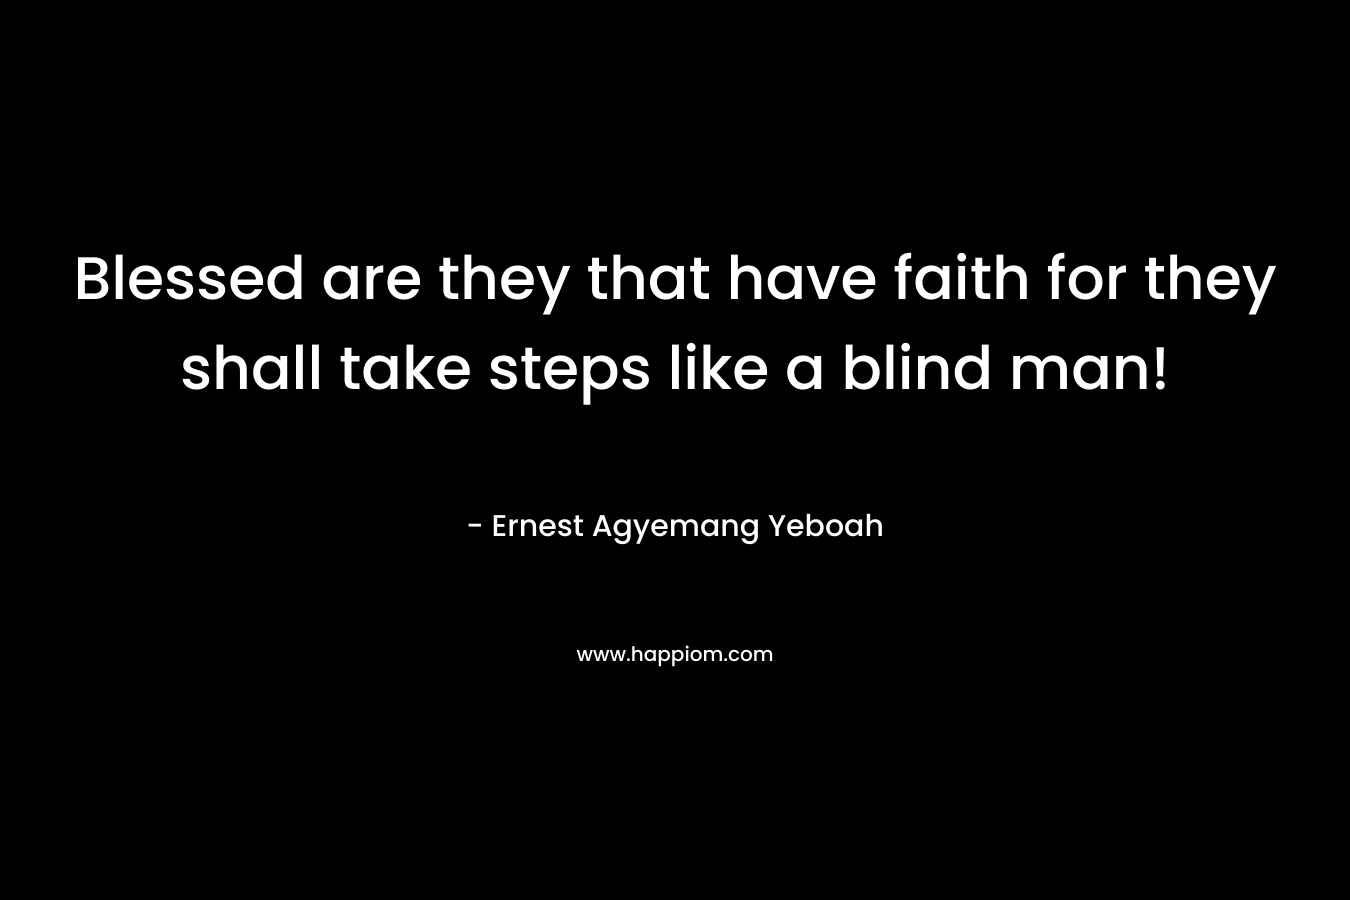 Blessed are they that have faith for they shall take steps like a blind man!